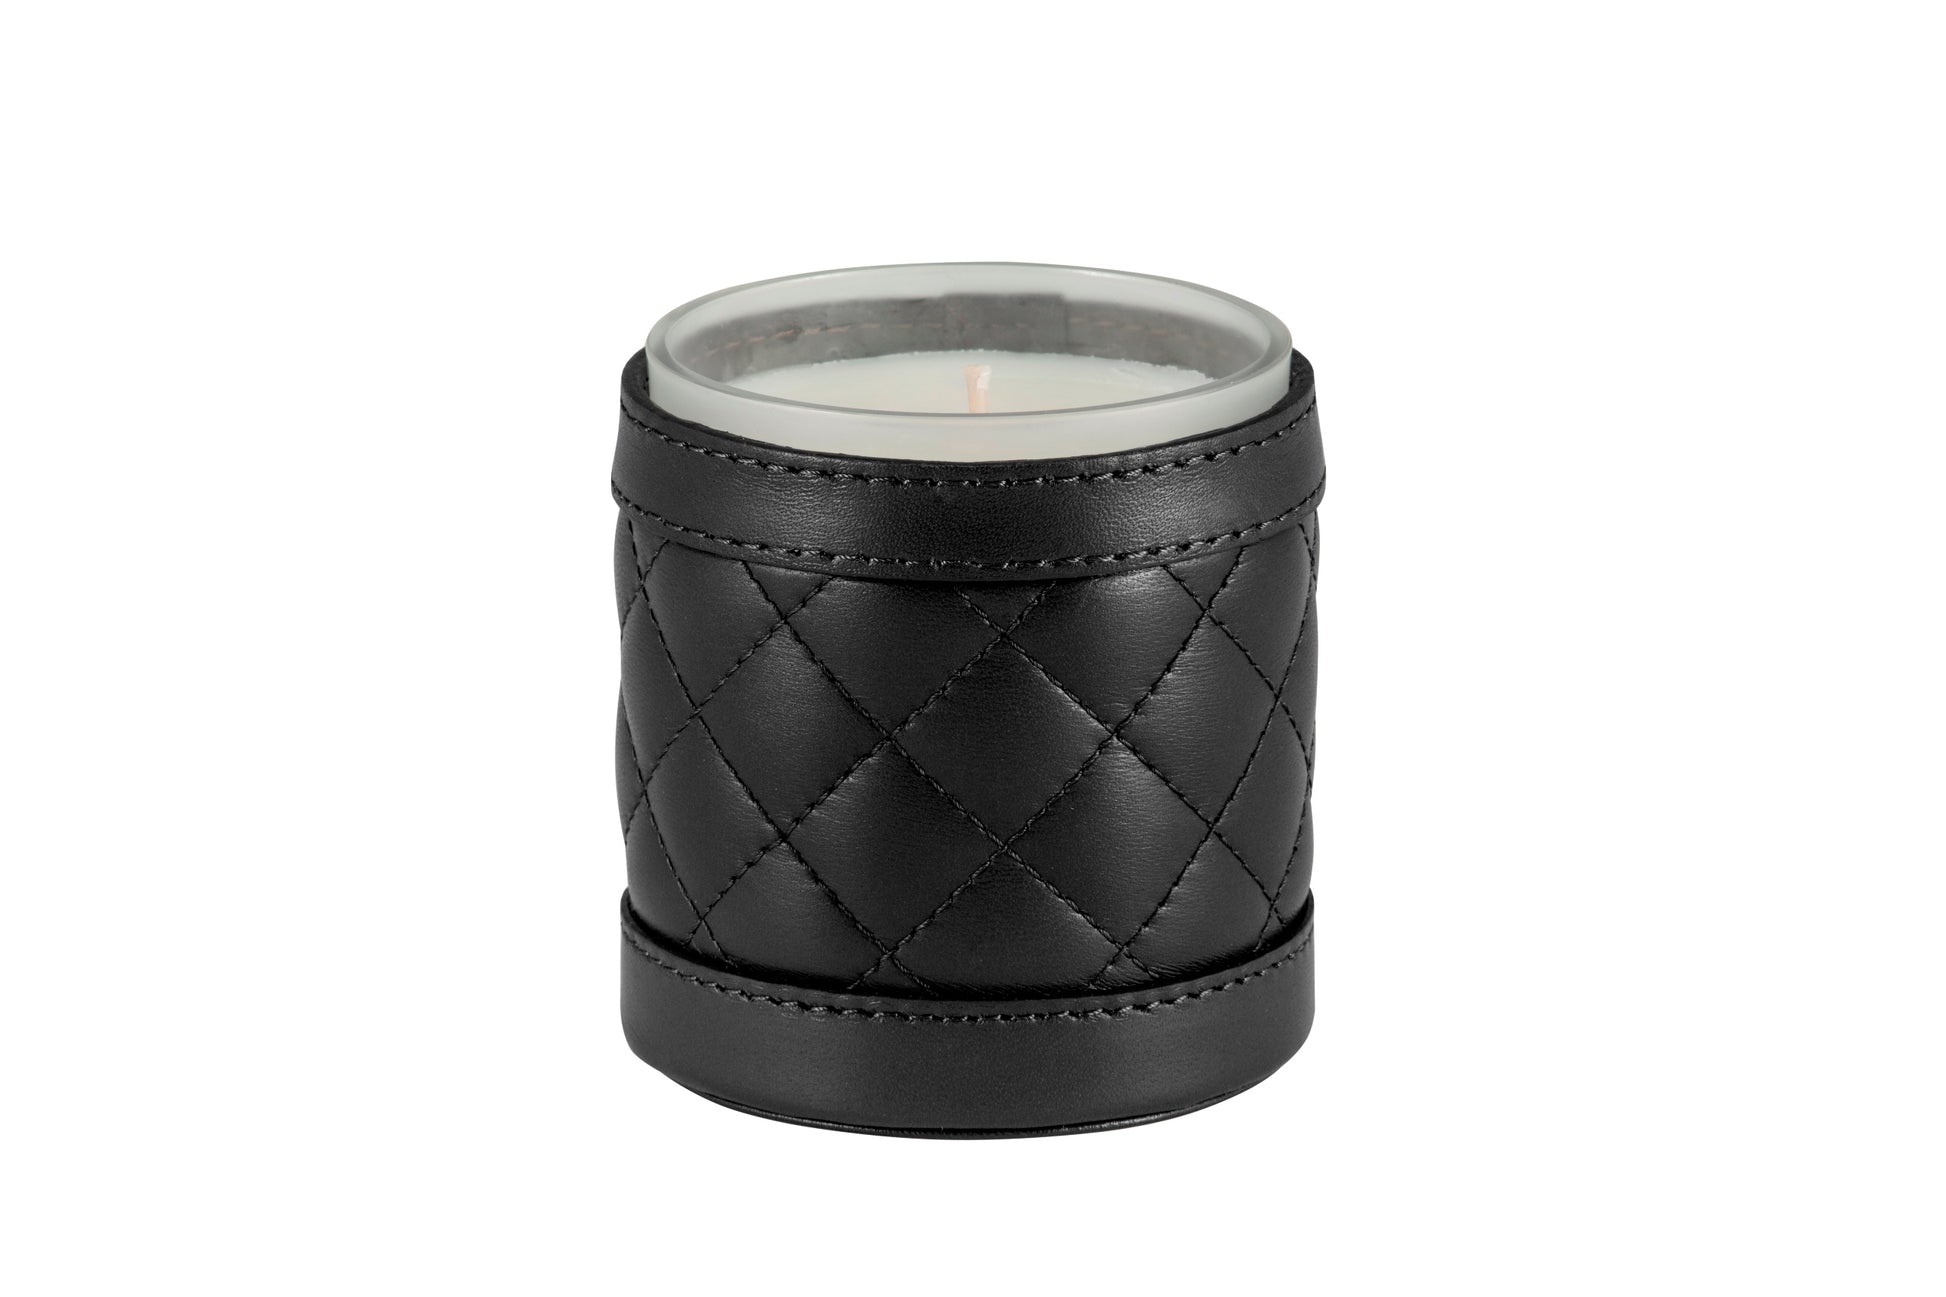 Riviere Ester Quilted Diamonds Padded Leather Candle Holder With Removable Scented Candle | Luxurious Quilted Diamonds Padded Leather Design | Enhance Your Home Ambiance with a Removable Scented Candle | Elevate Your Decor with Riviere's Exquisite Accessories | Available at 2Jour Concierge, #1 luxury high-end gift & lifestyle shop